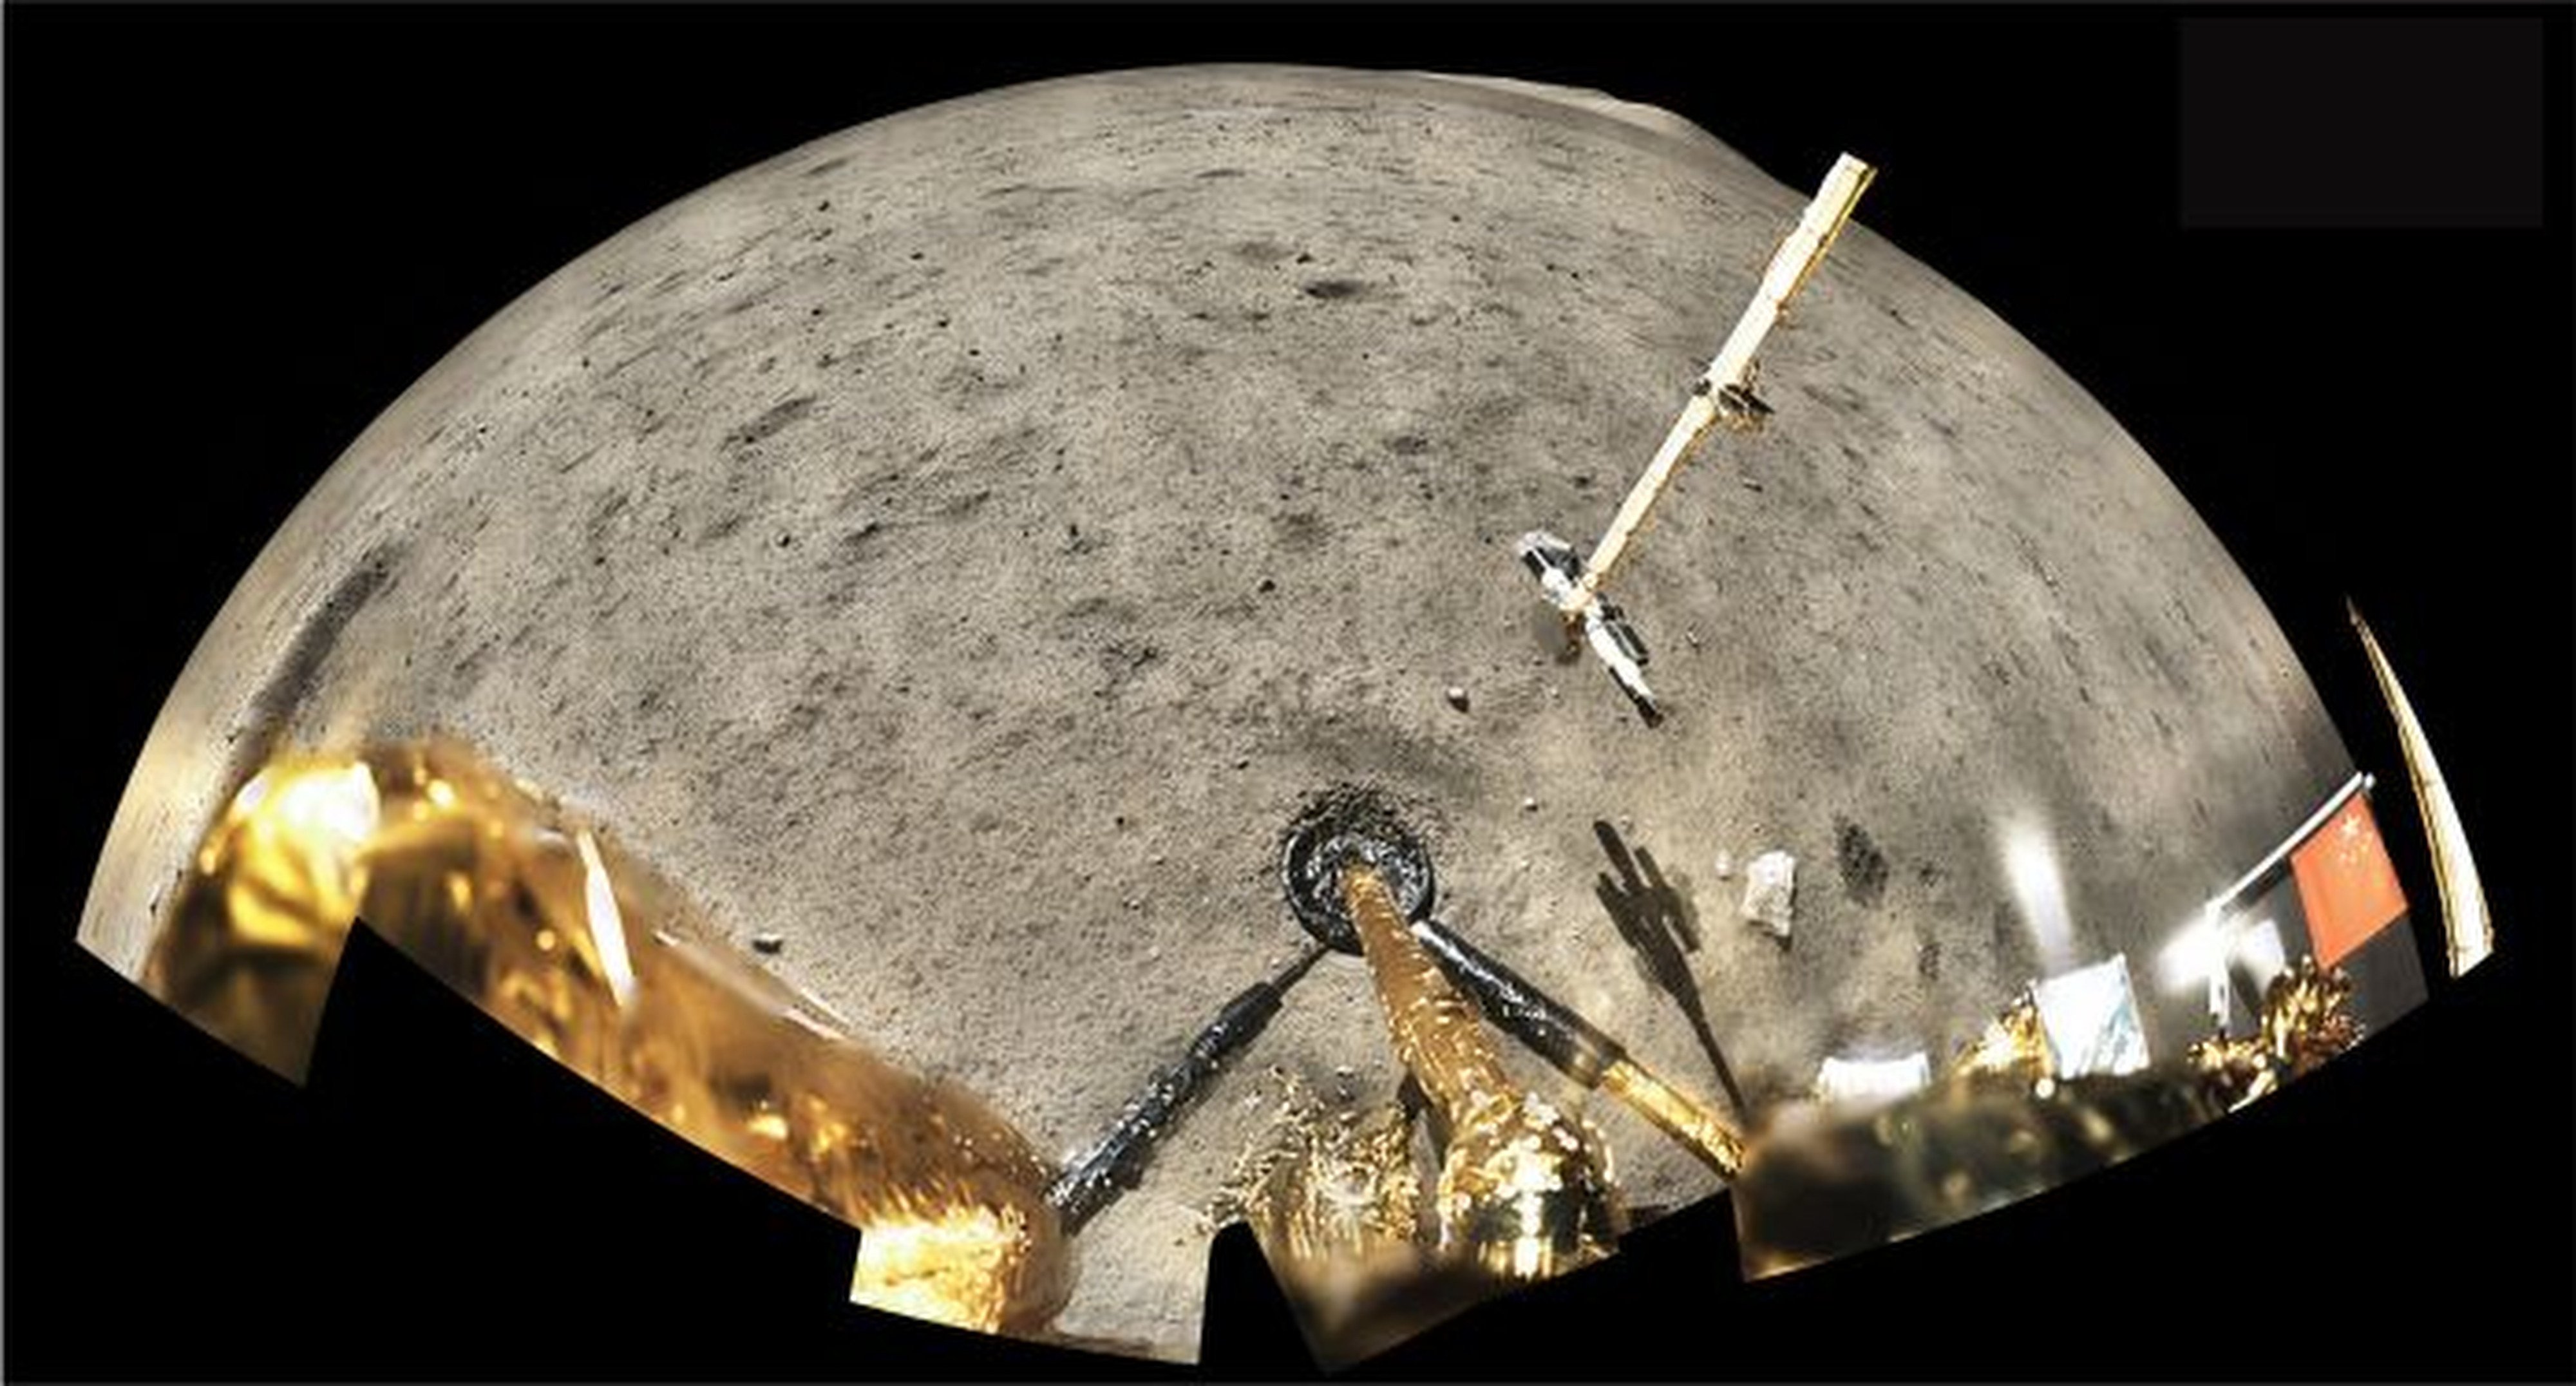 The Chang’e 5 probe returned to Earth in December 2020 with 1.7kg (3.74lbs) of rocks and dust from Oceanus Procellarum on the moon. Photo: Handout